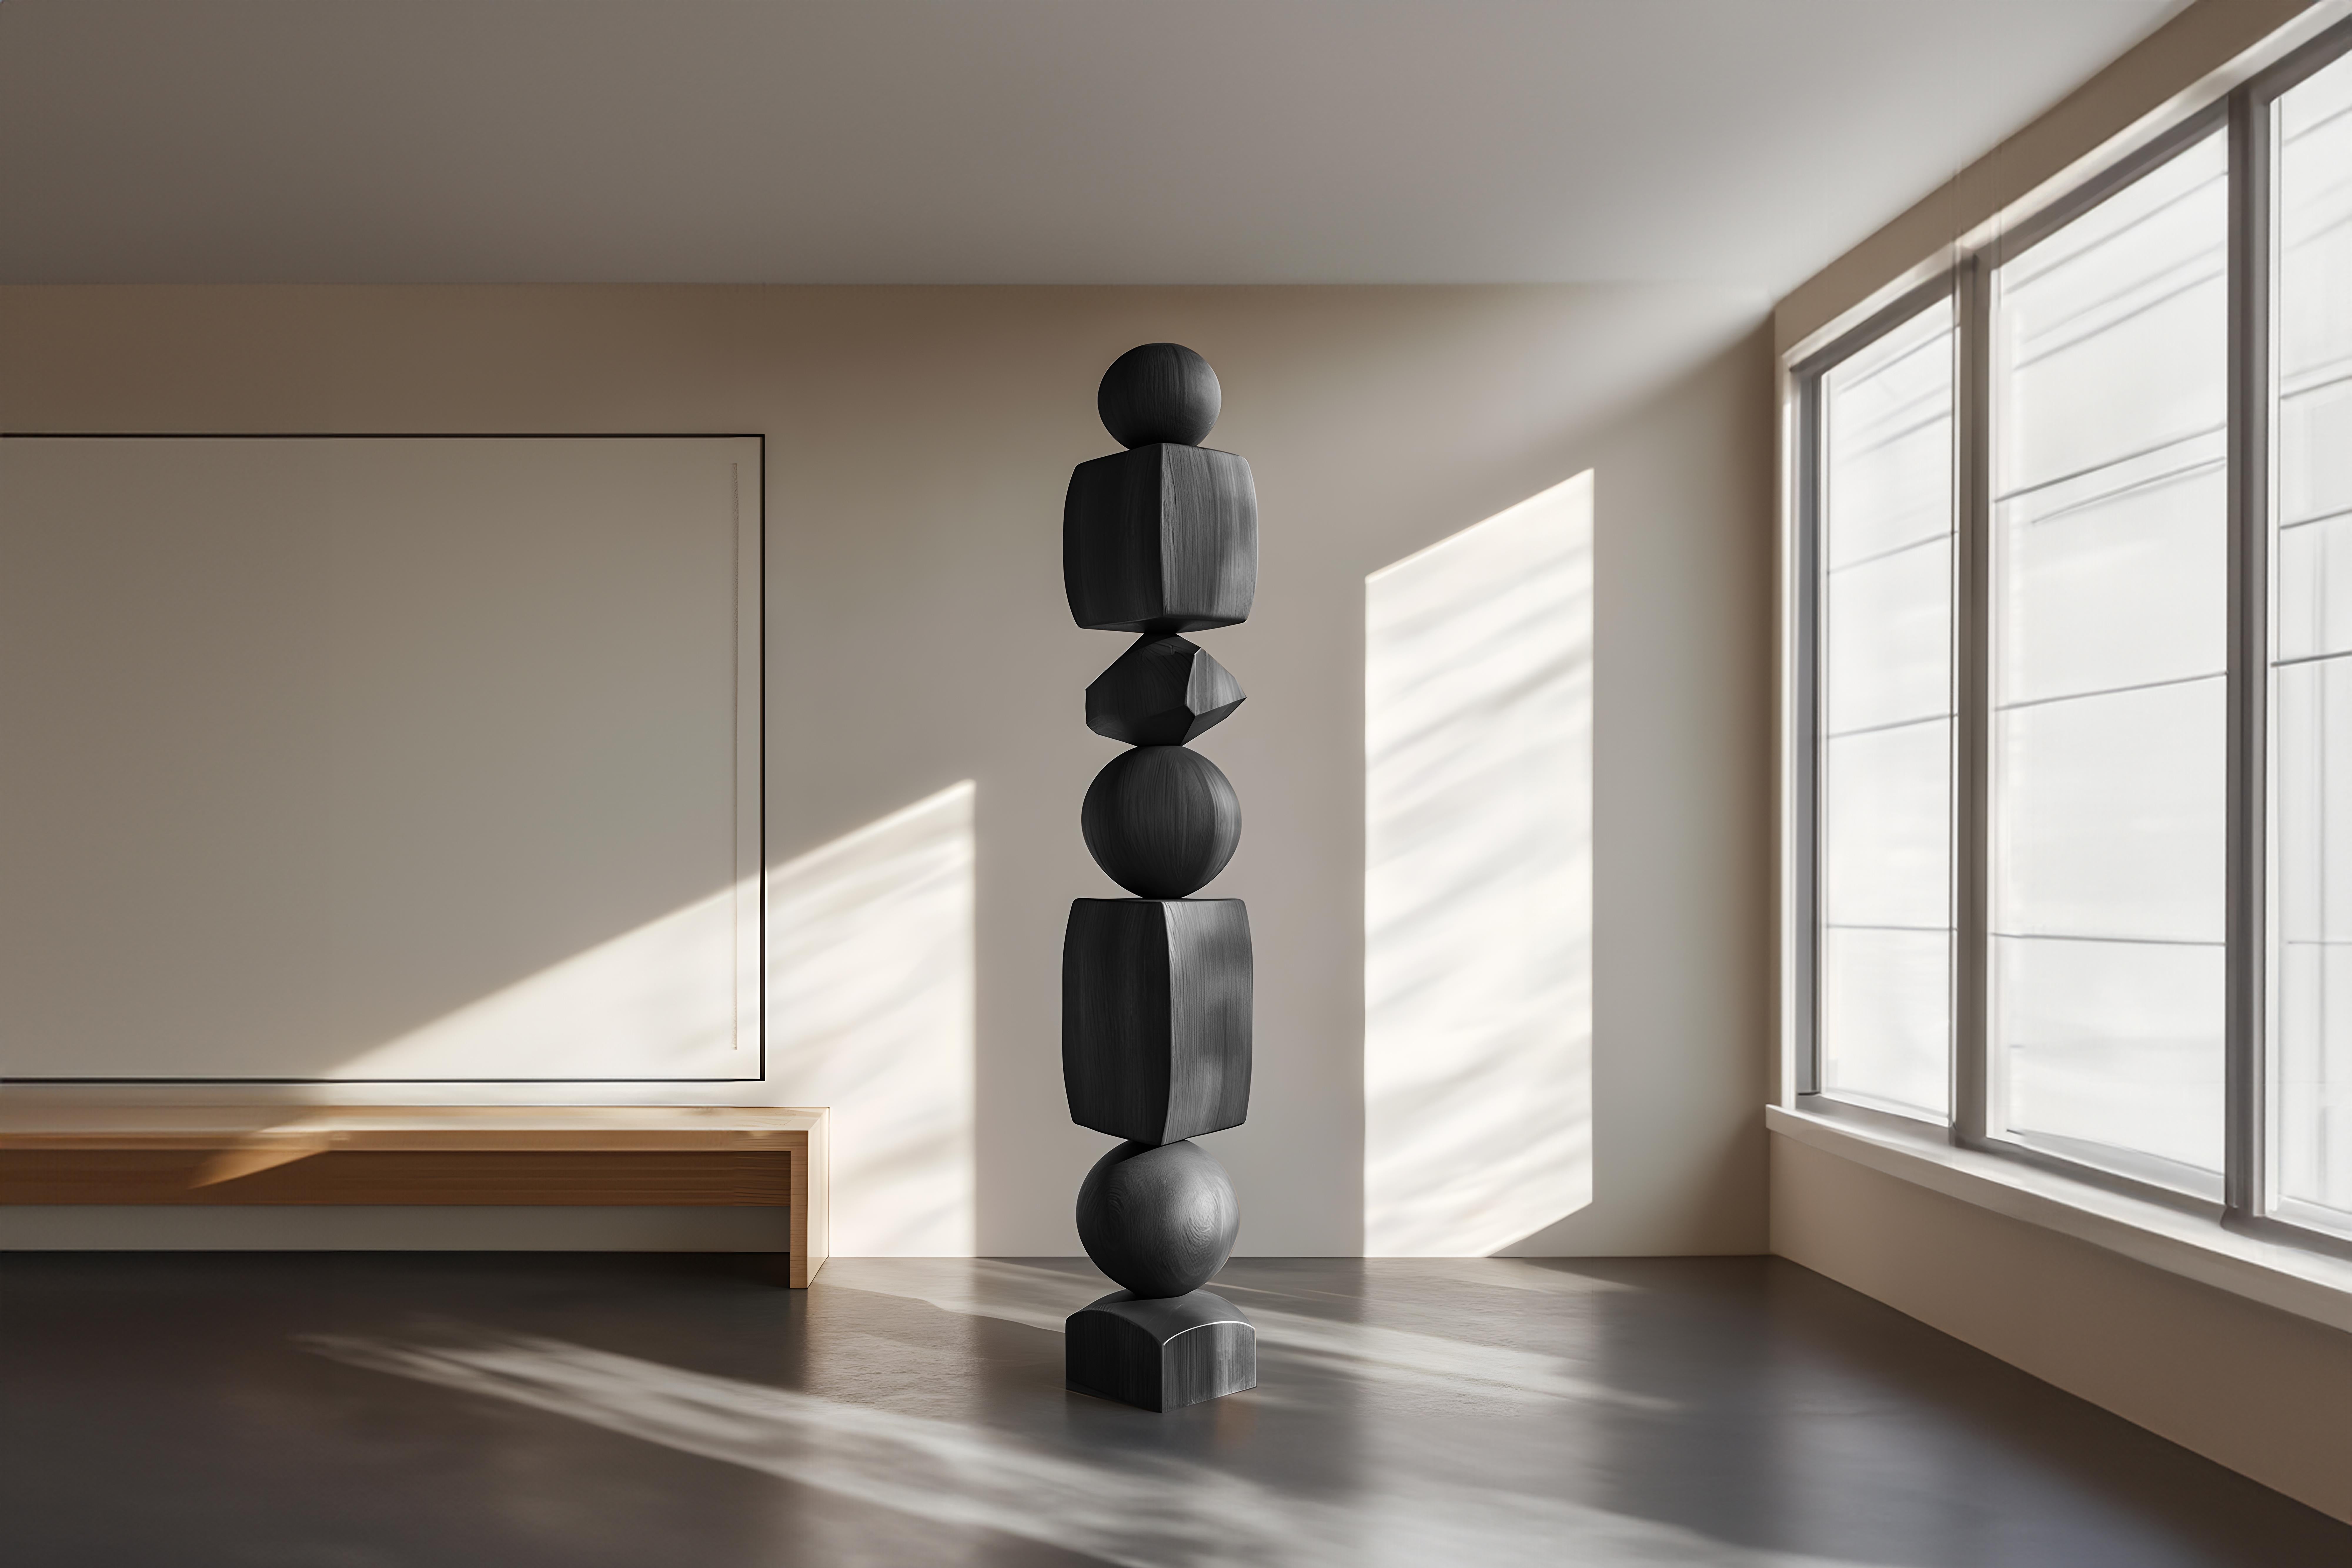 Sleek and Dark Design in Black Solid Wood Totem, Still Stand No87
——

Joel Escalona's wooden standing sculptures are objects of raw beauty and serene grace. Each one is a testament to the power of the material, with smooth curves that flow into one